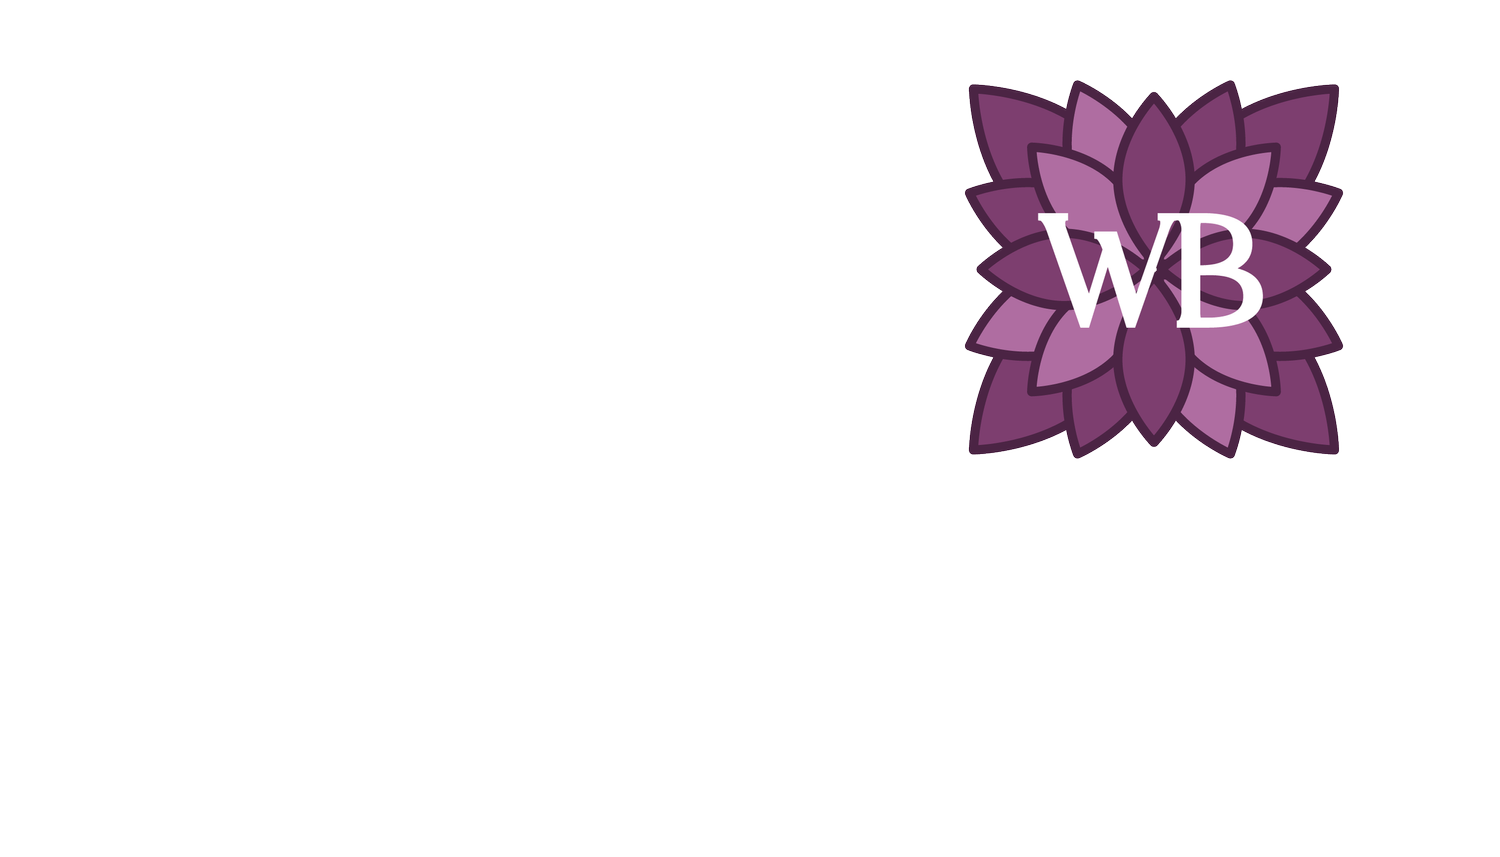 Lead Boldly